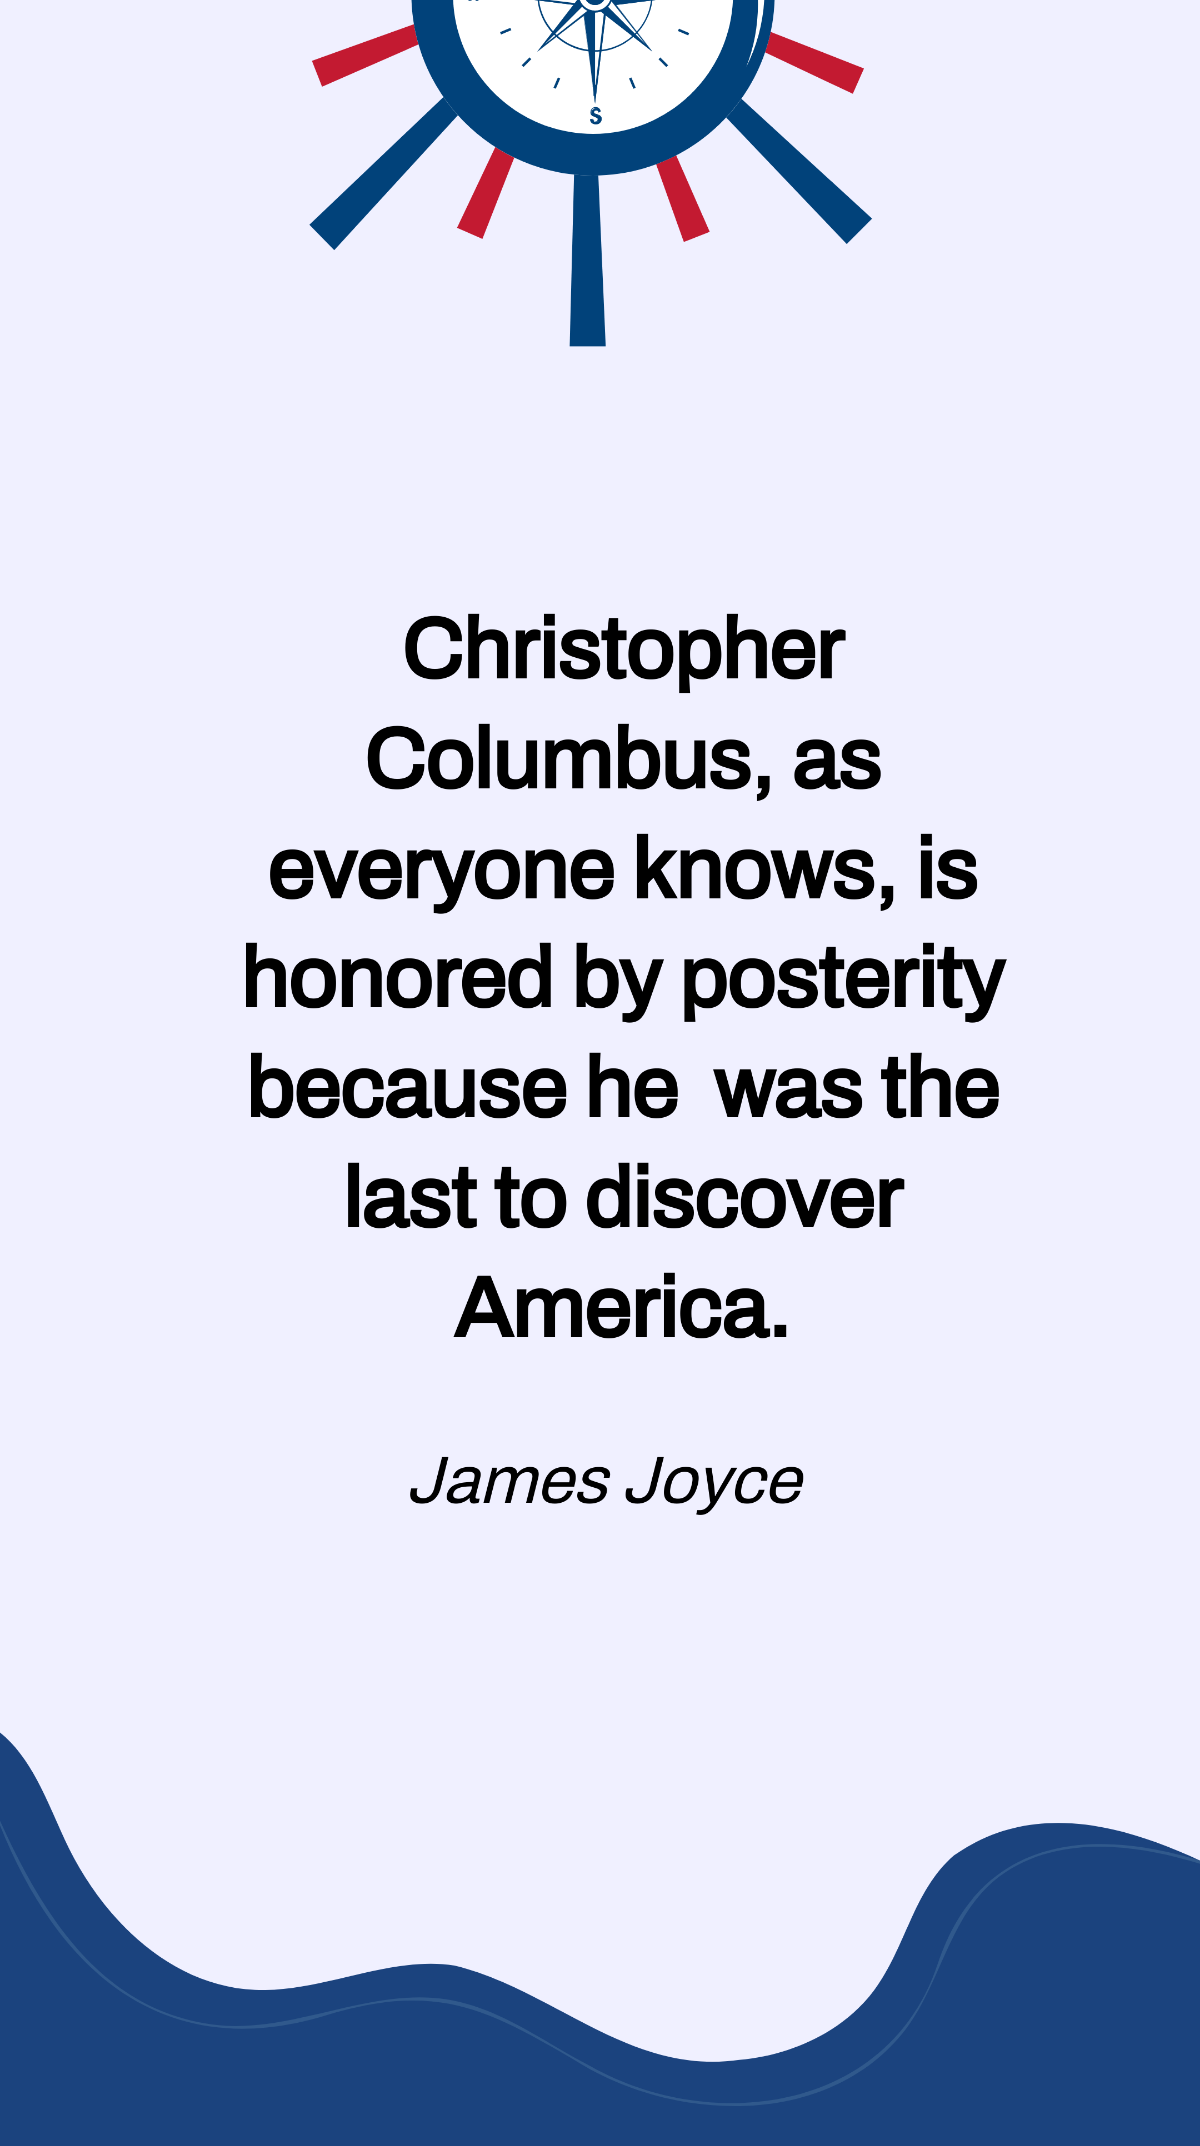 James Joyce- Christopher Columbus, as everyone knows, is honored by posterity because he was the last to discover America. Template